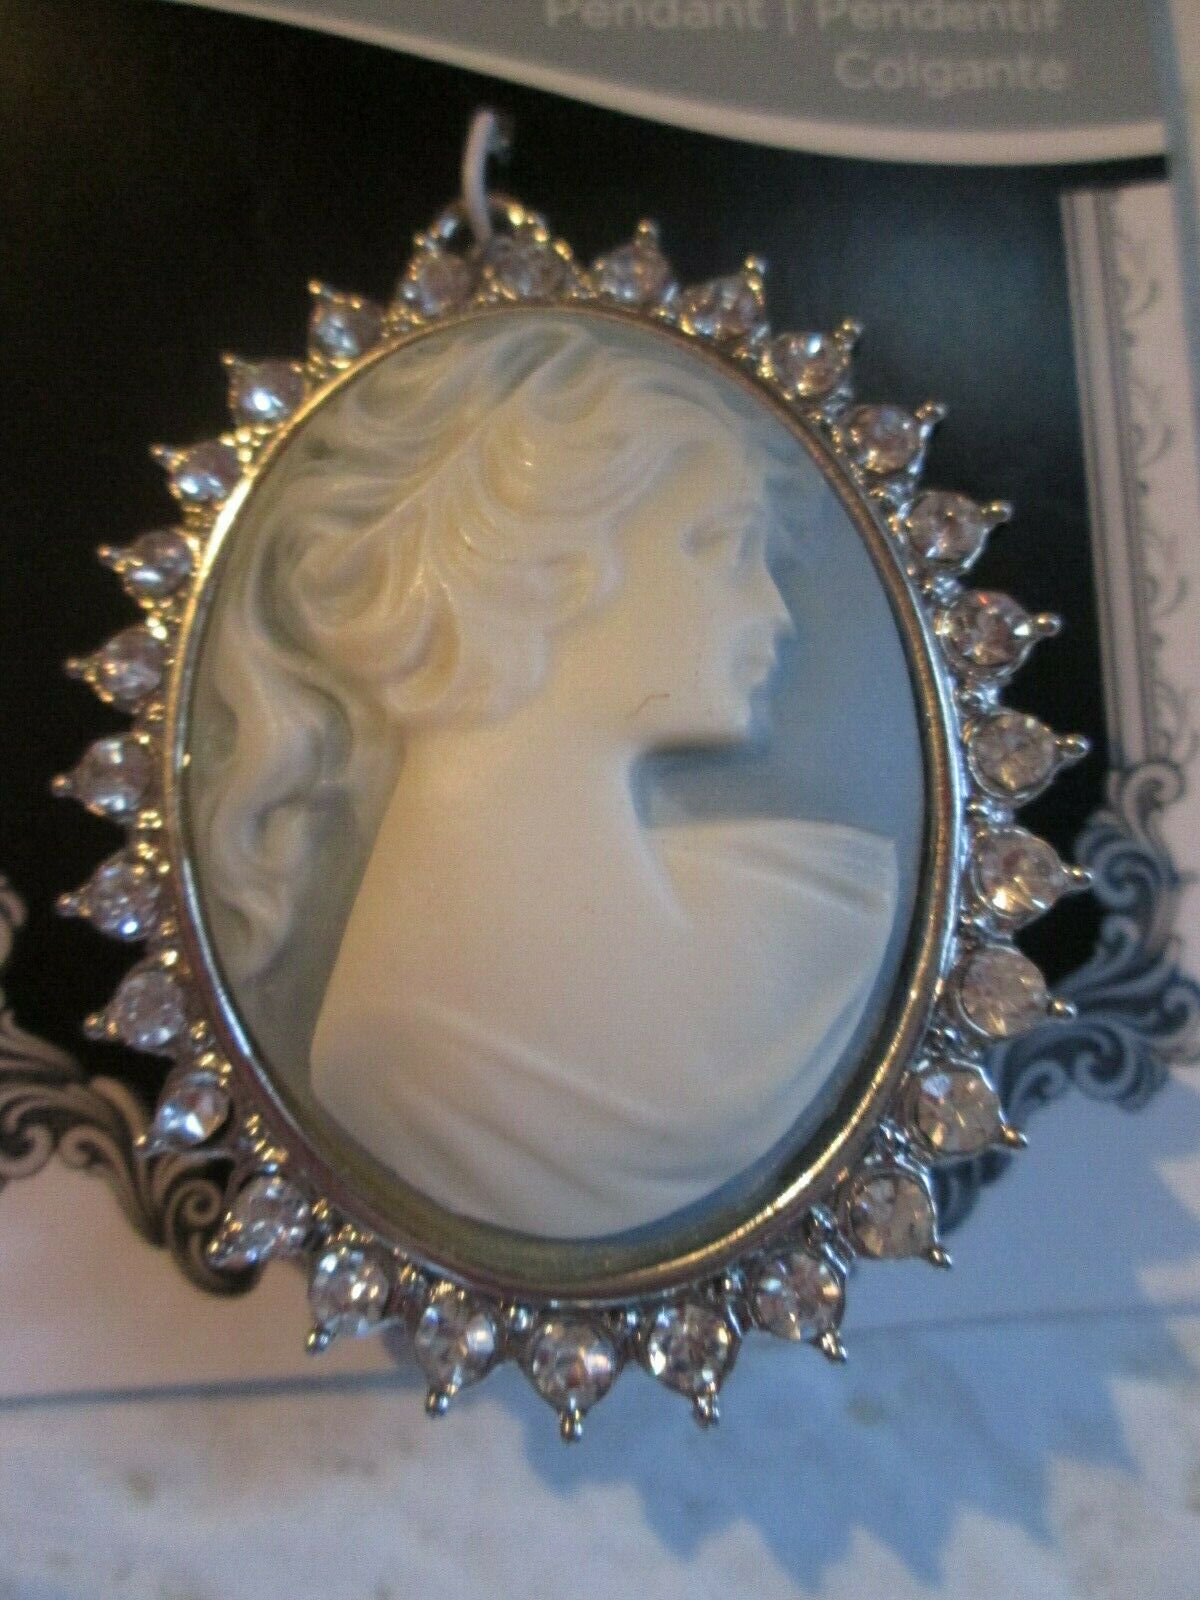 Blue Brooch Cameo Pin Pendant Oval Crystal Rhinestones New Victorian Repro Large